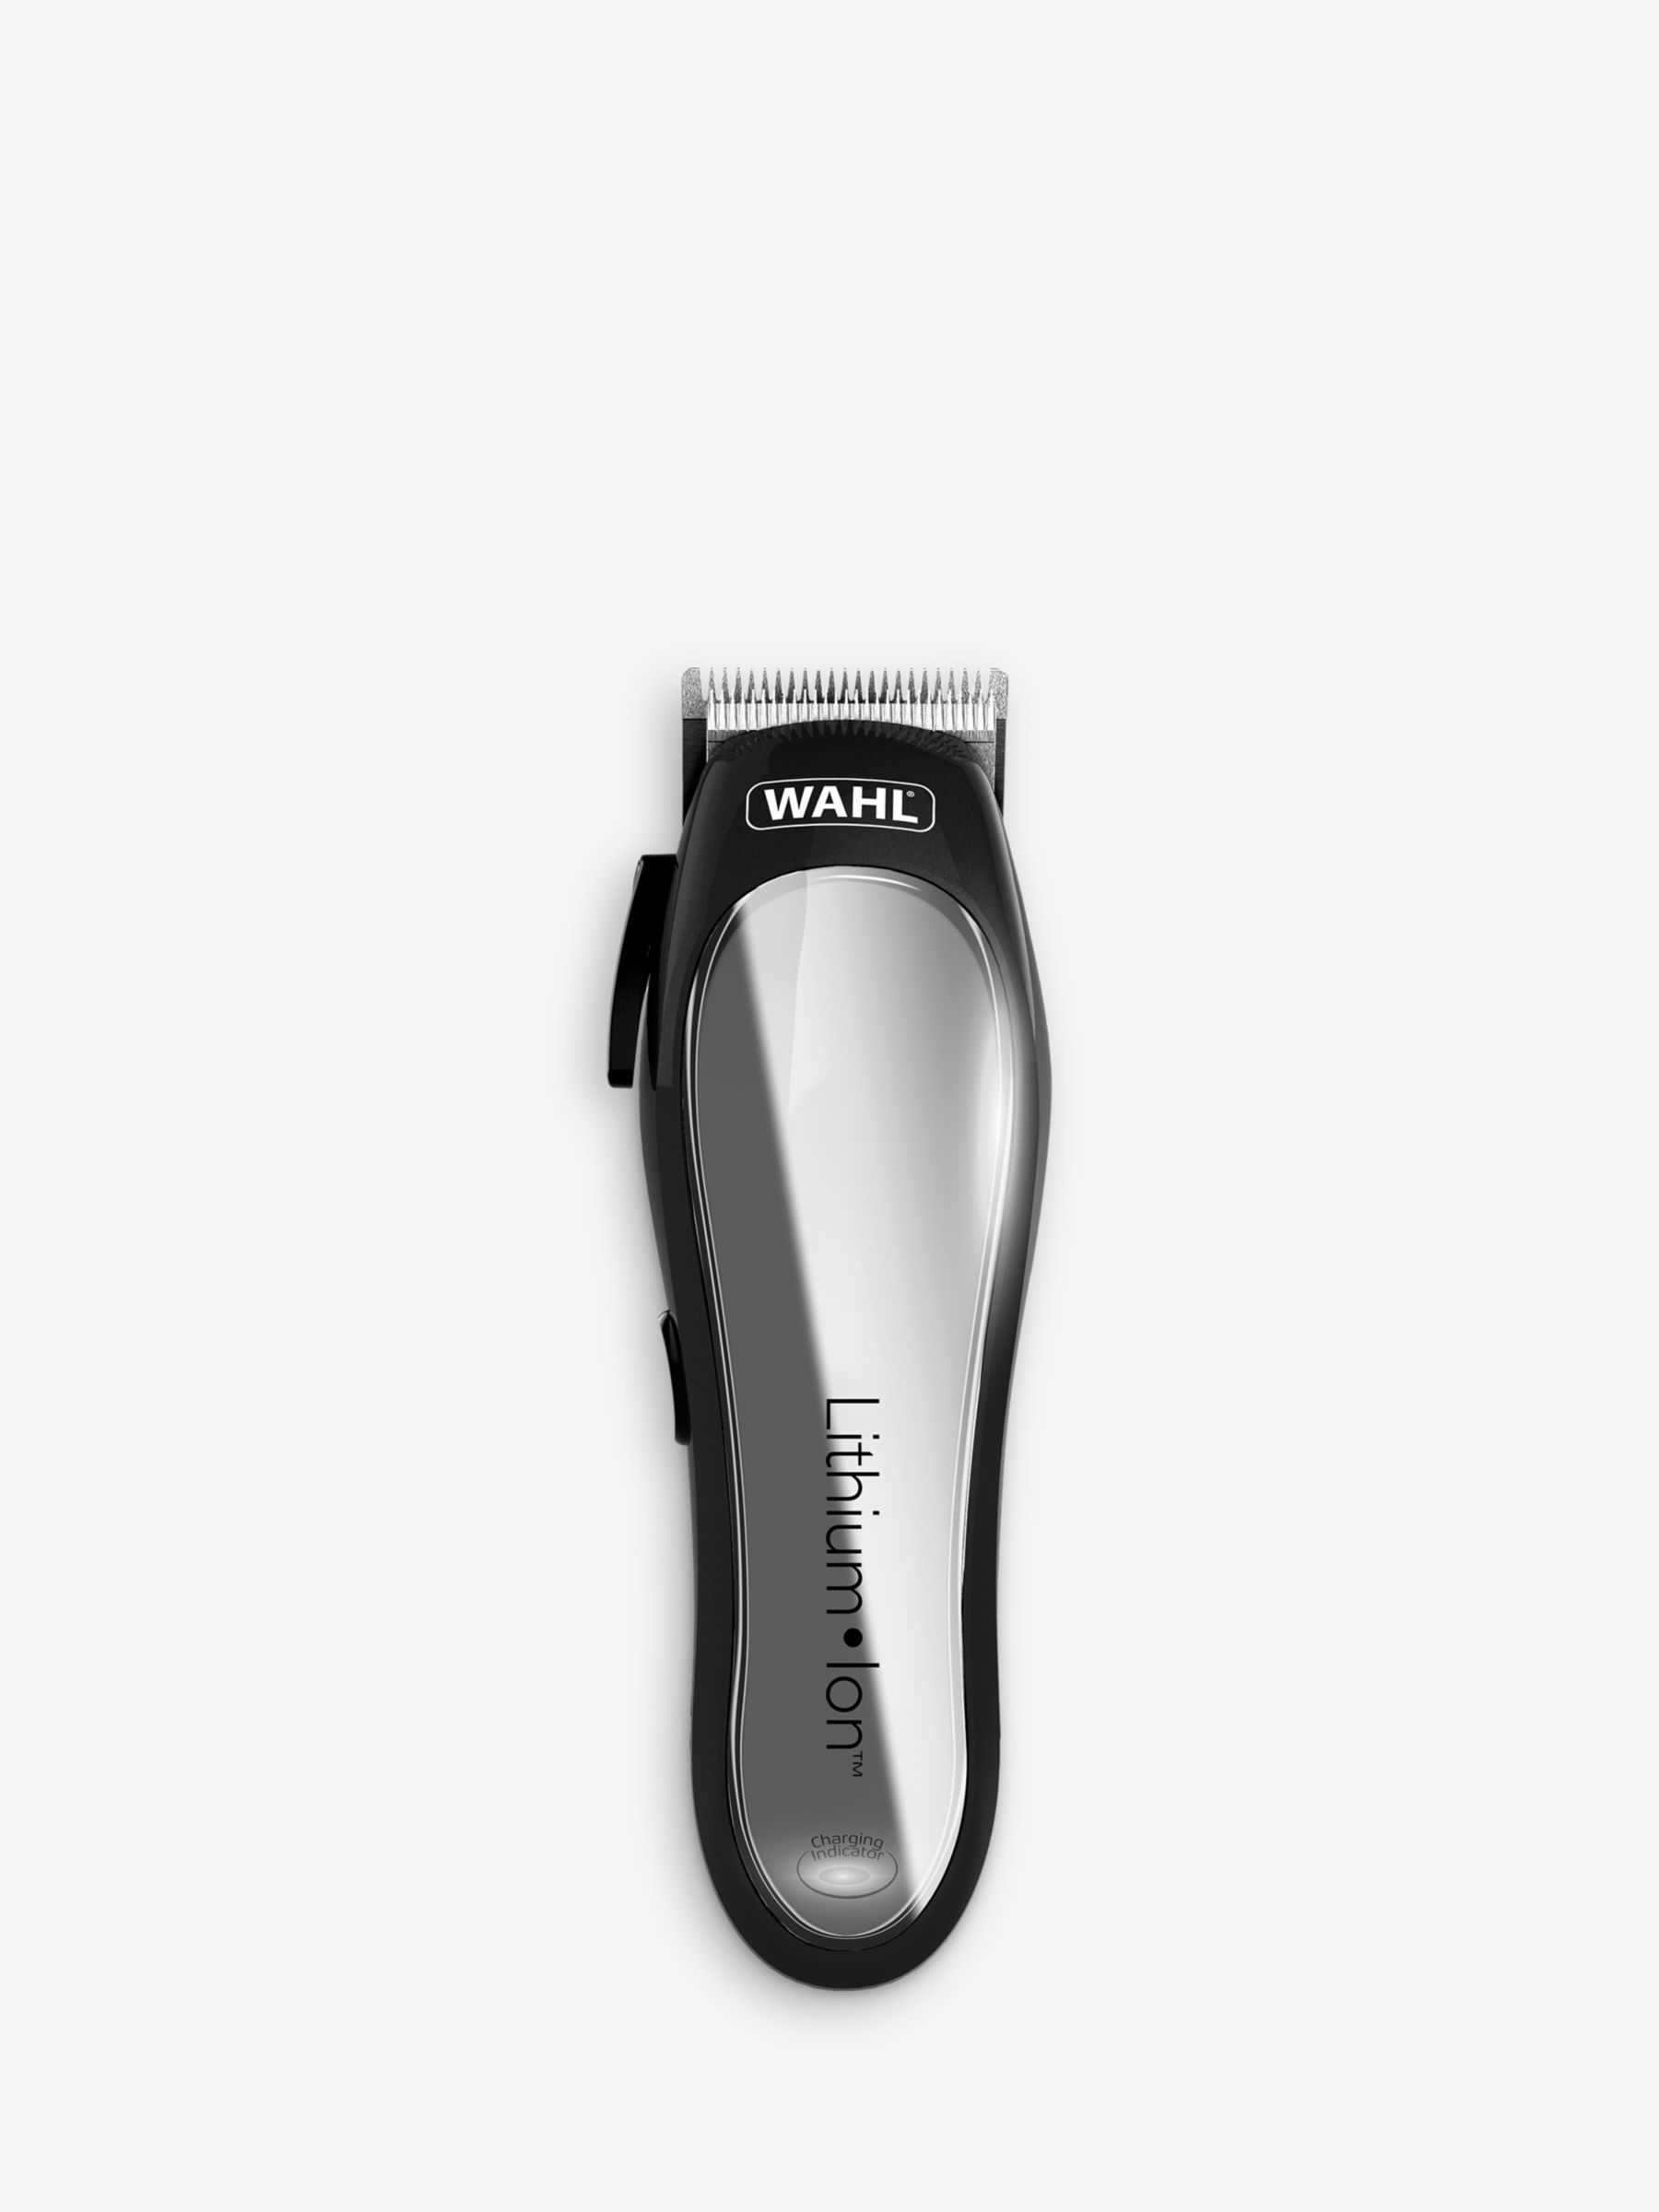 john lewis wahl hair clippers